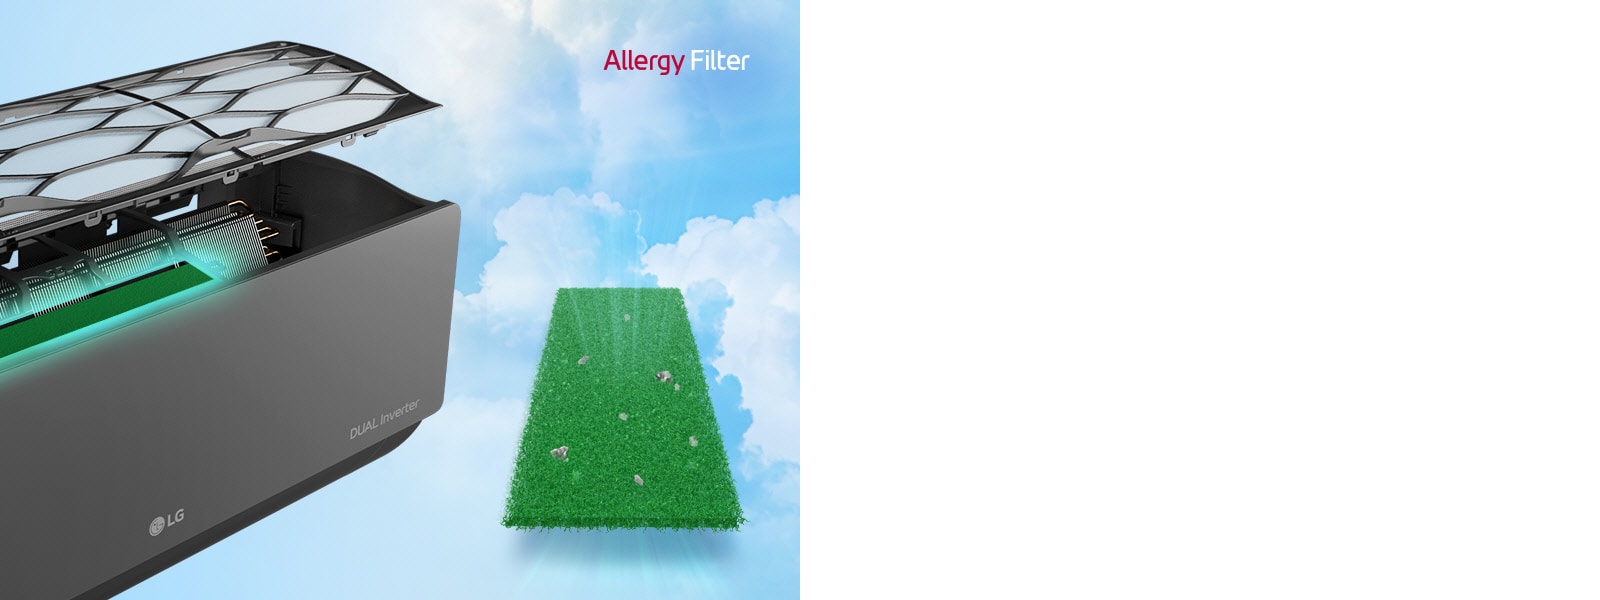 The side angle of the air conditioner is shown with the filters floating above to show the allergy filter installed inside. Beside the machine is the entire green allergy filter with dust mites caught in it. The Allergy Filter logo is in the upper right corner.